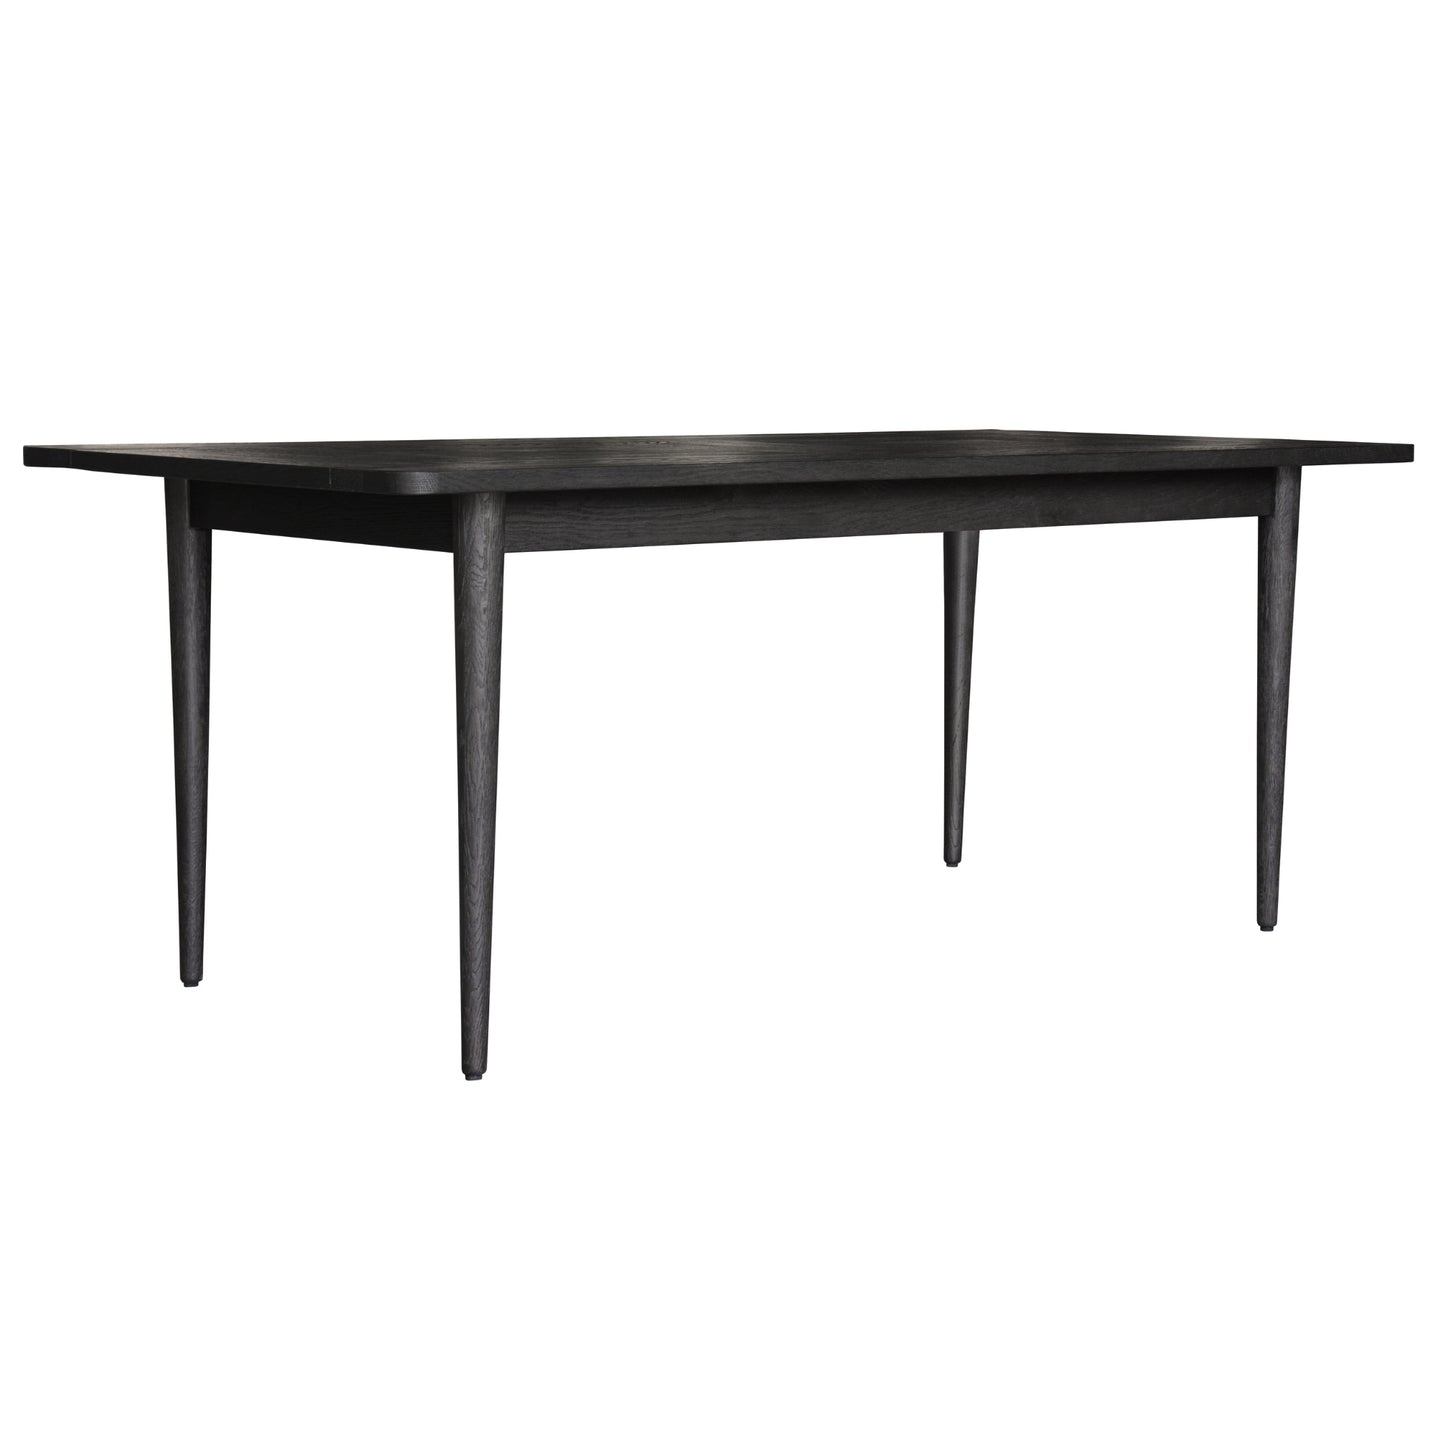 Claire Dining Table 180cm Solid Oak Wood Home Dinner Furniture - Black